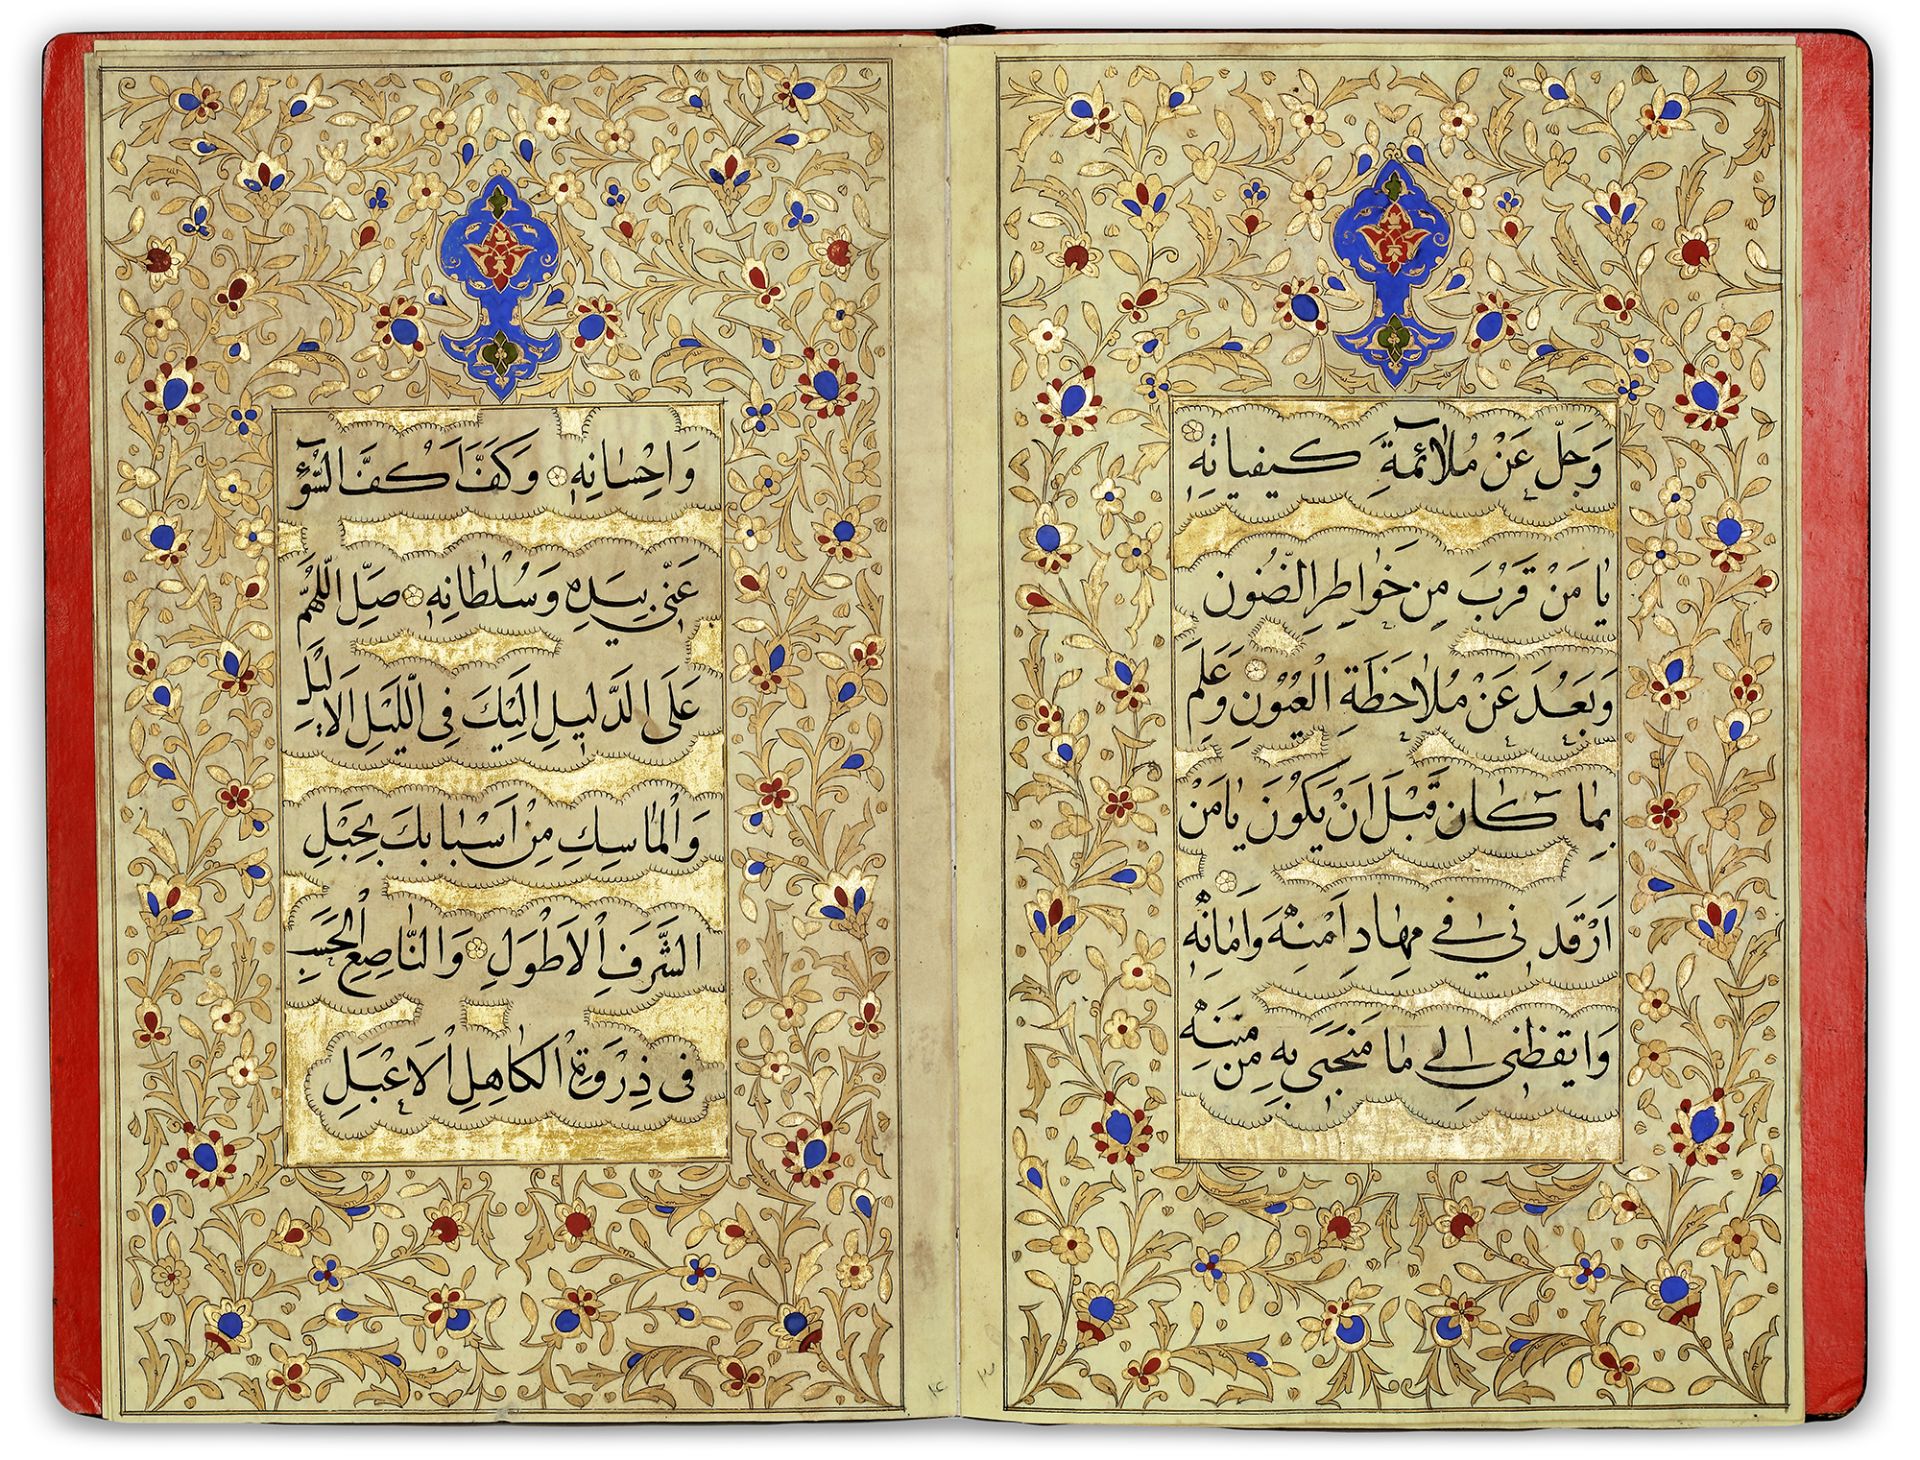 DU'A AL-SABAH, SIGNED AND DATED, MIR TAHIR, BEGINNING OF SHAWWAL 1297 AH/1880 AD - Image 6 of 10